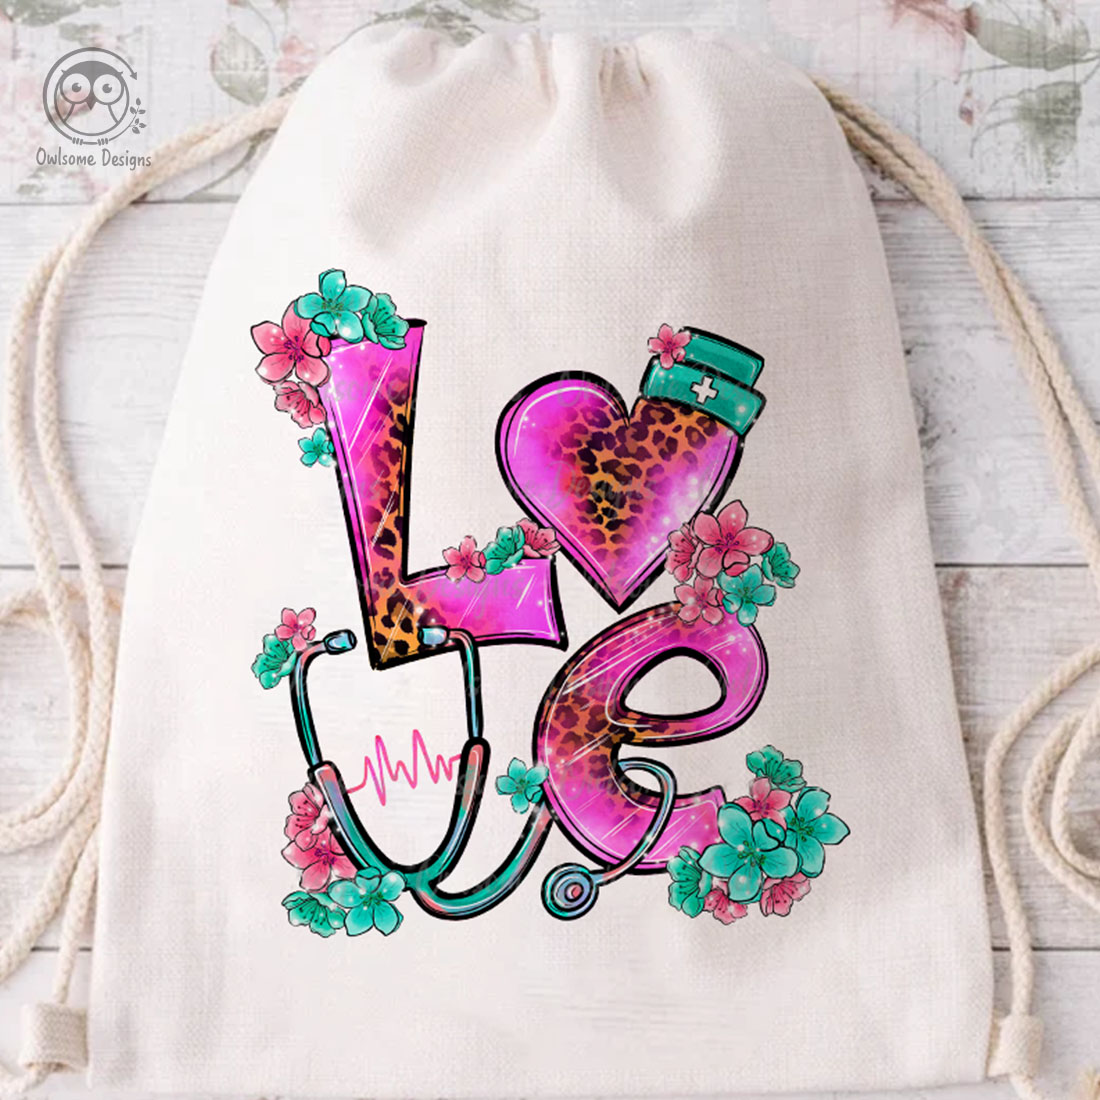 Image of a bag with a charming inscription Love with nurse accessories.